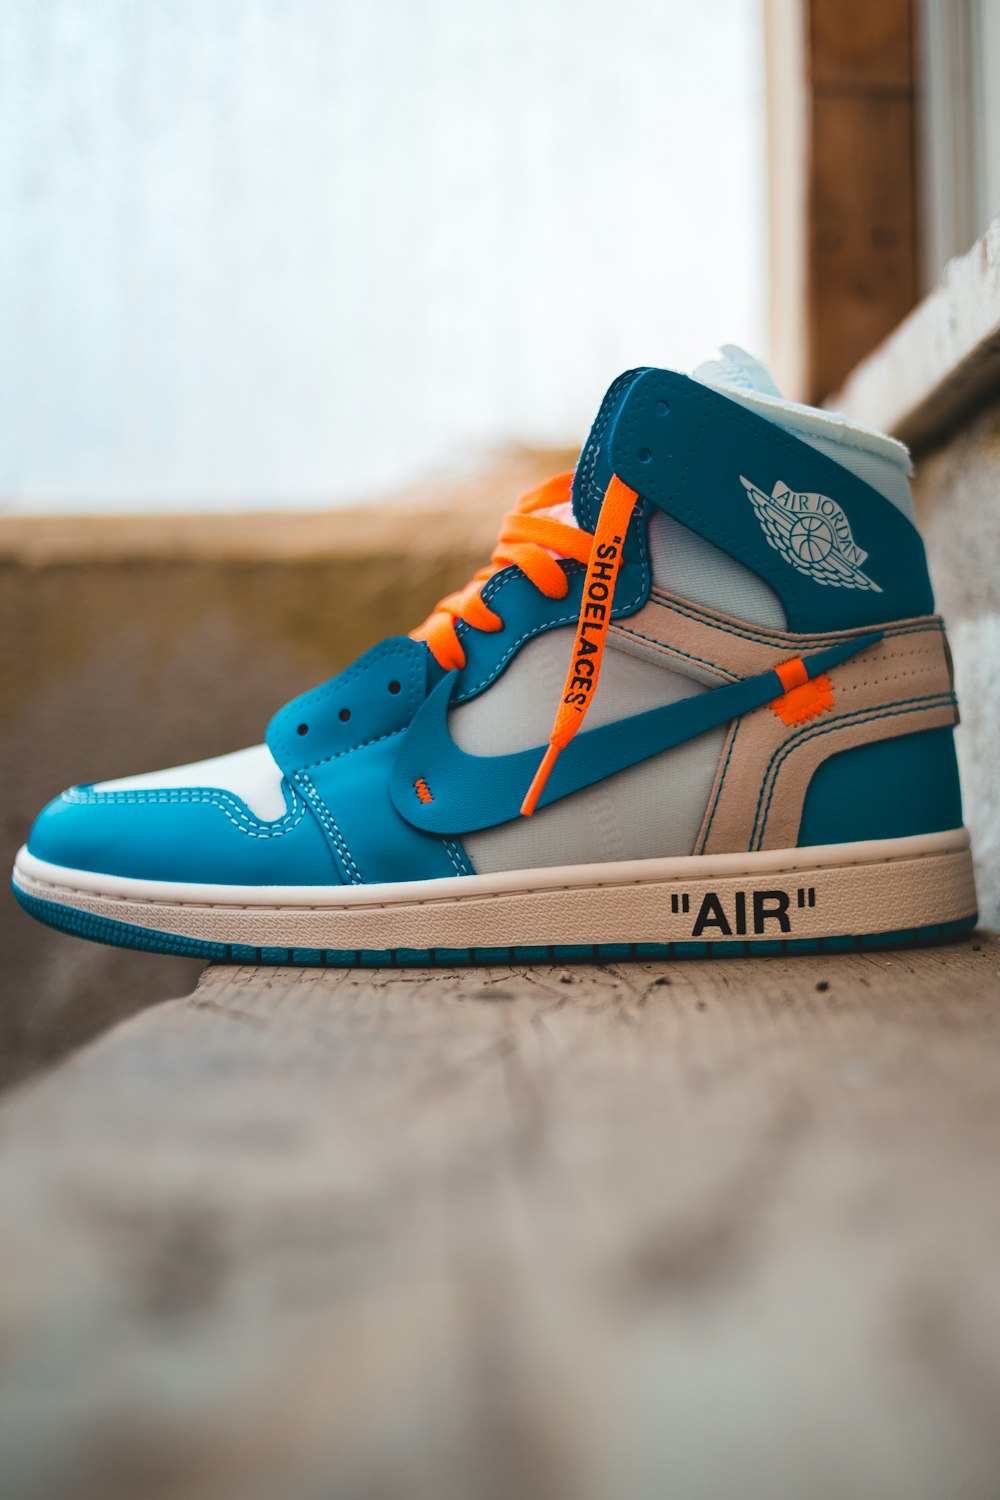 blue and black nike high top sneakers photo – Free Image on Unsplash